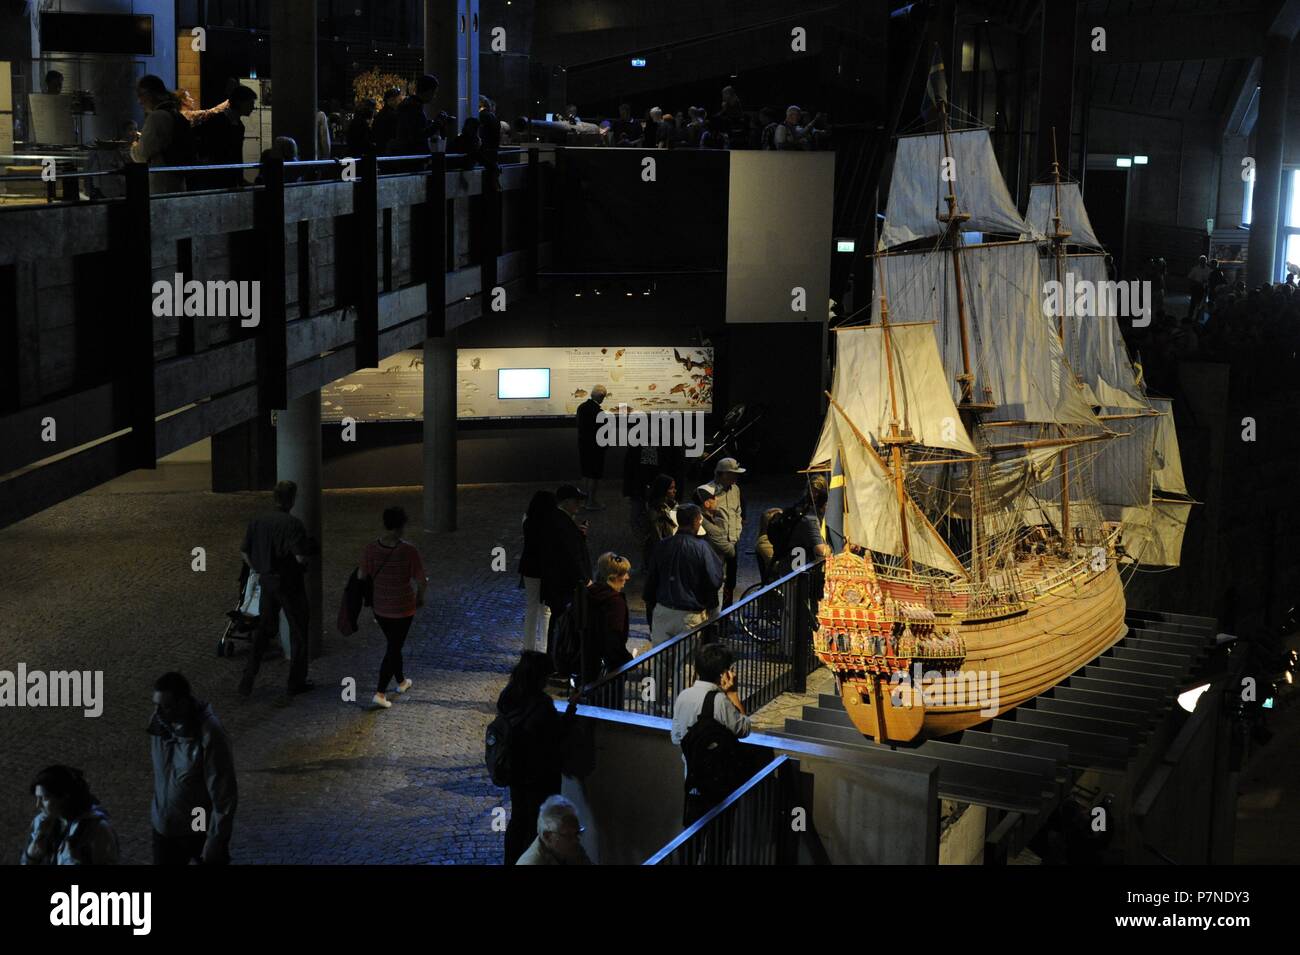 Stockholm. Sweden. Vasa Museum. Built to house Warship Vasa, which was  built at 1626-1628 on the orders of the King of Sweden Gustavus Adolphus.  Interior Stock Photo - Alamy